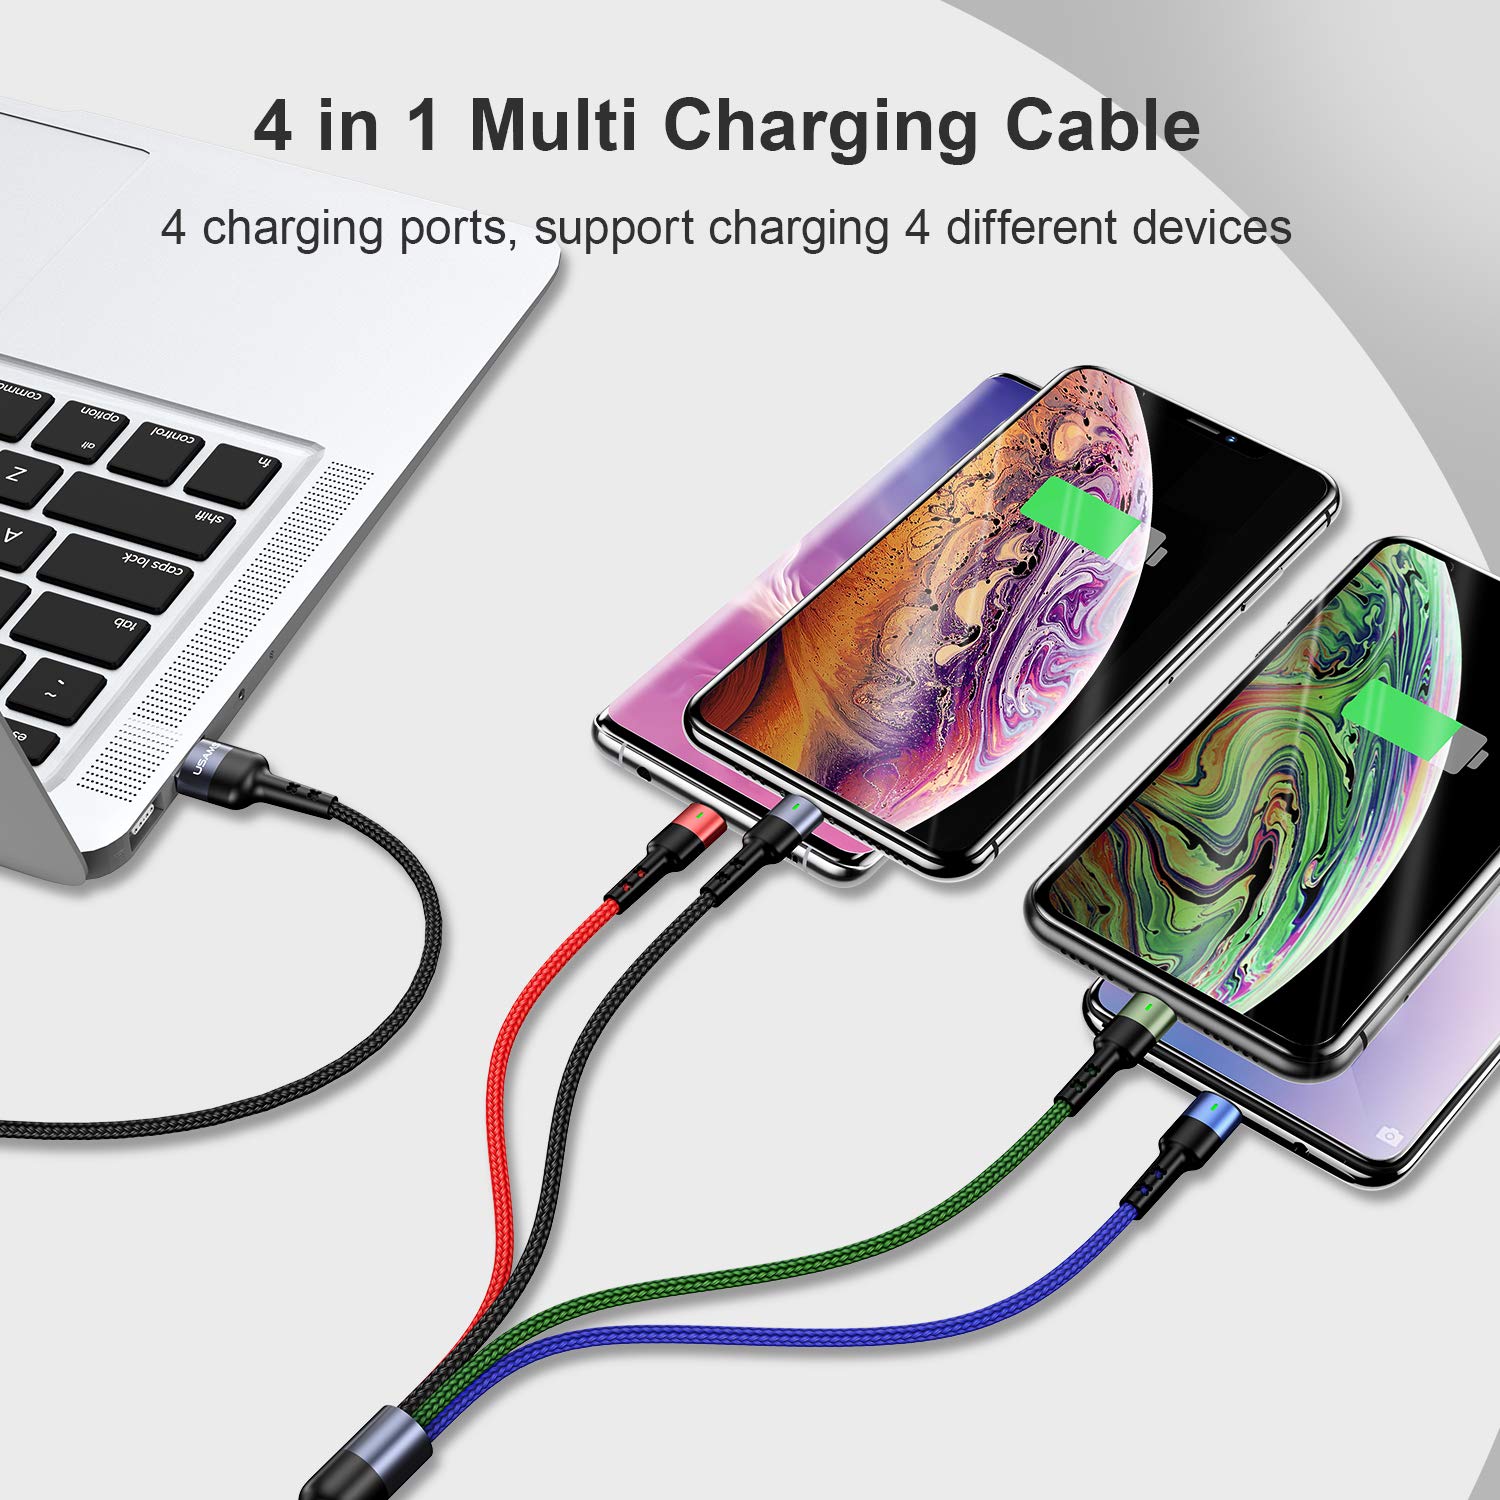 ISAIBELL USAMS Multi Charging Cable 2Pack 4FT 4 in 1 Nylon Braided Multiple USB Fast Charging Cord Adapter Type C Micro USB Port Connectors Compatible Cell Phones Tablets and More